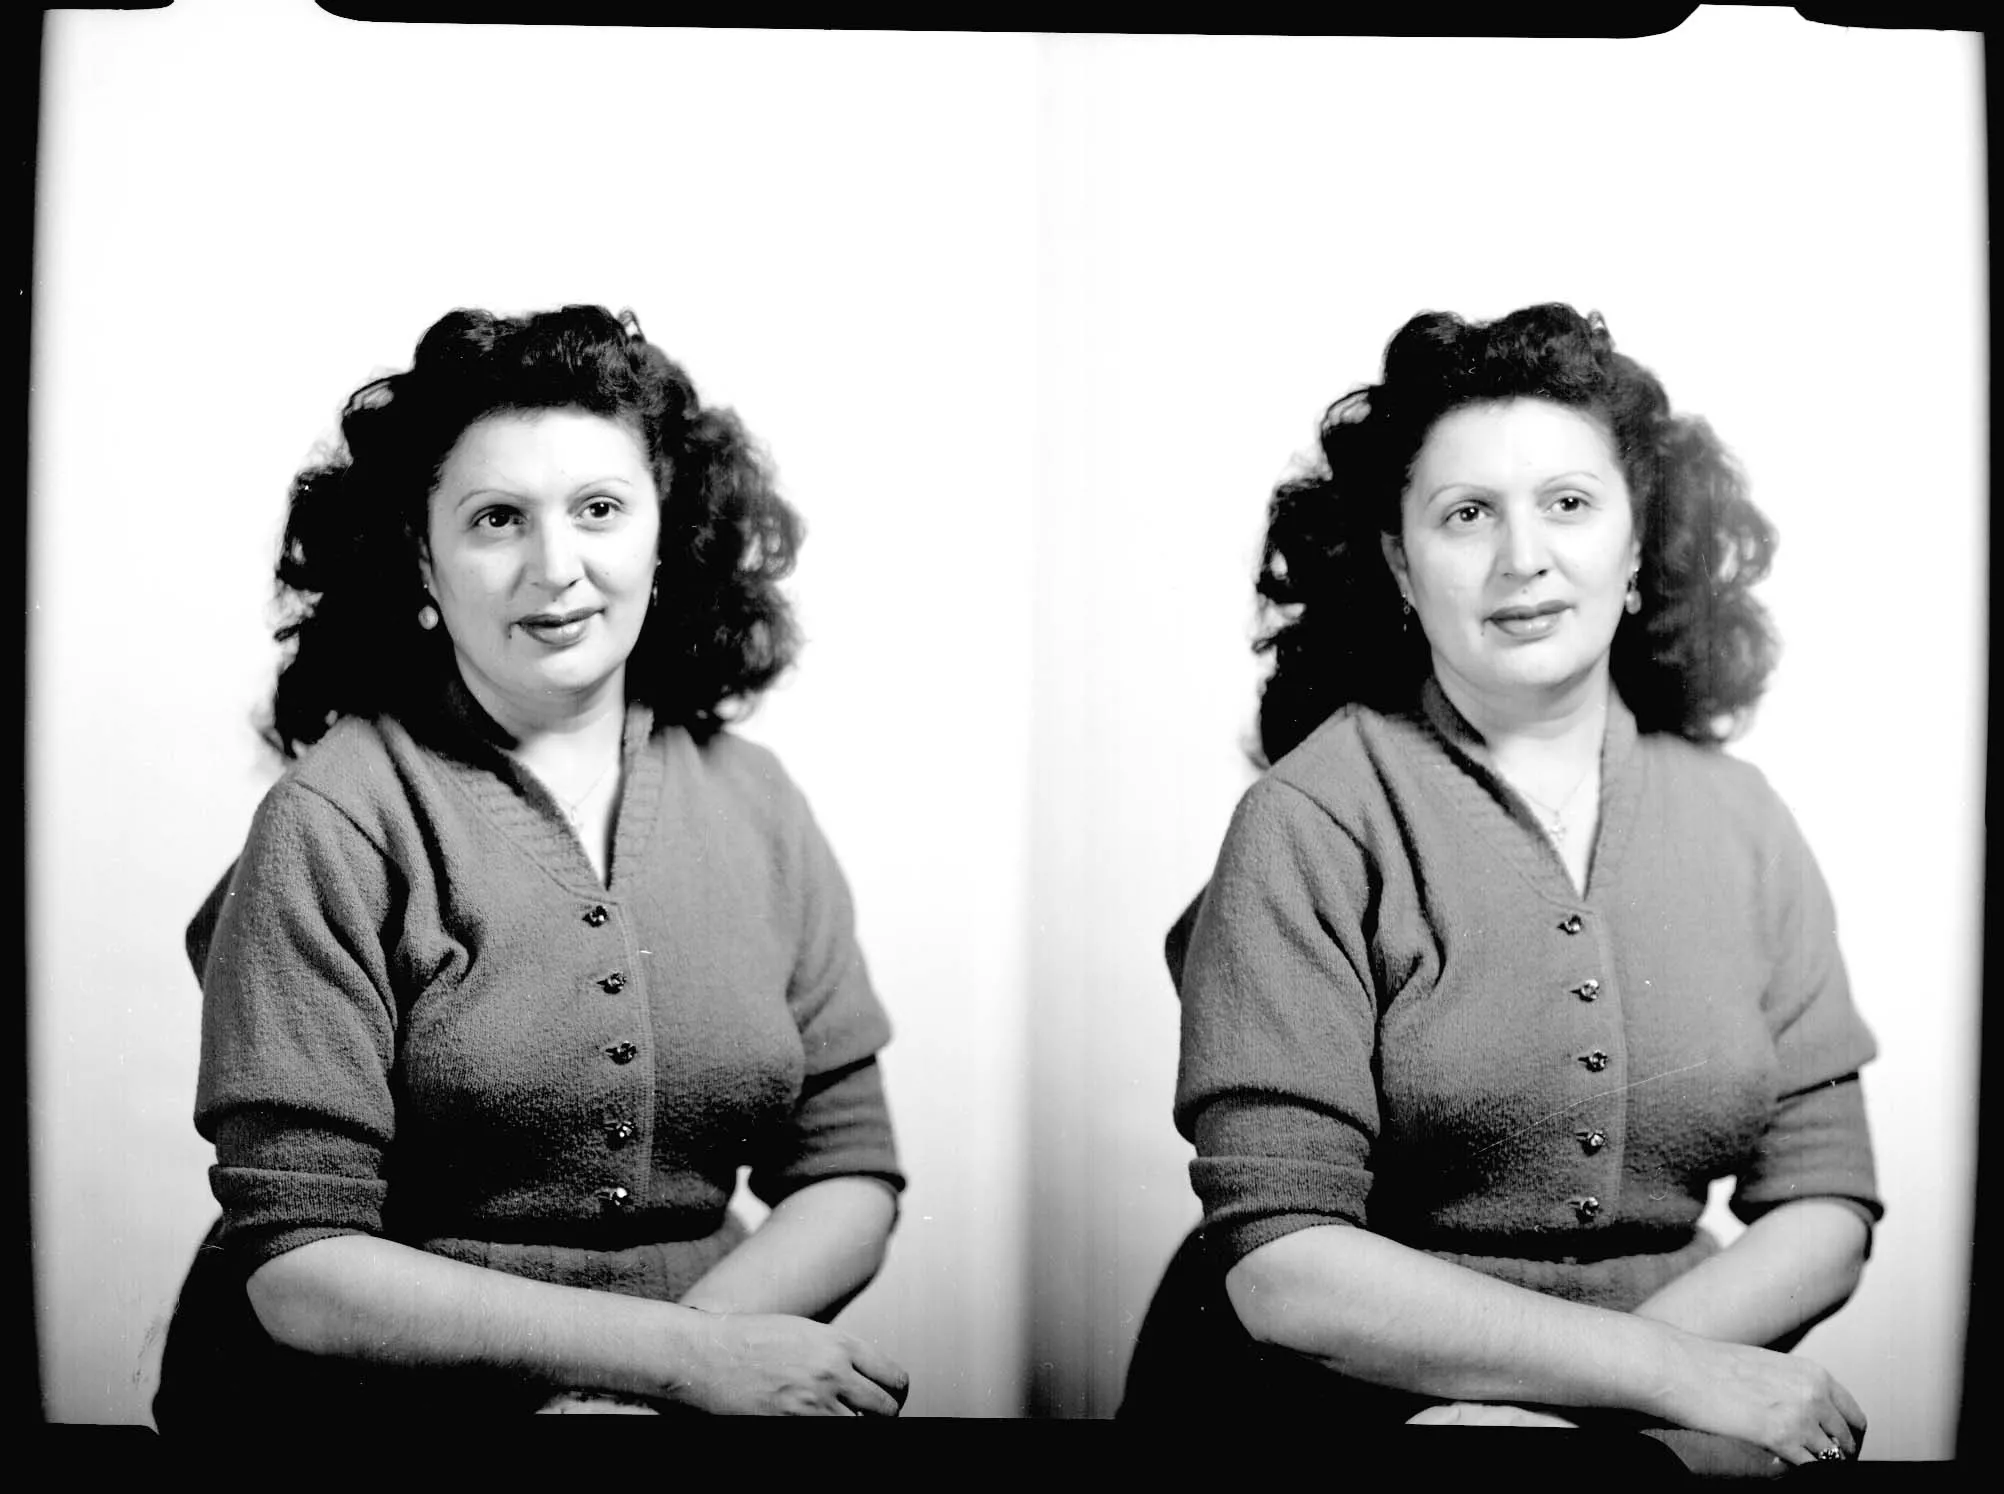 Luoma Del Monte in 1955. Photo Courtesy University of Idaho Library Special Collections (Barnard Stockbridge)